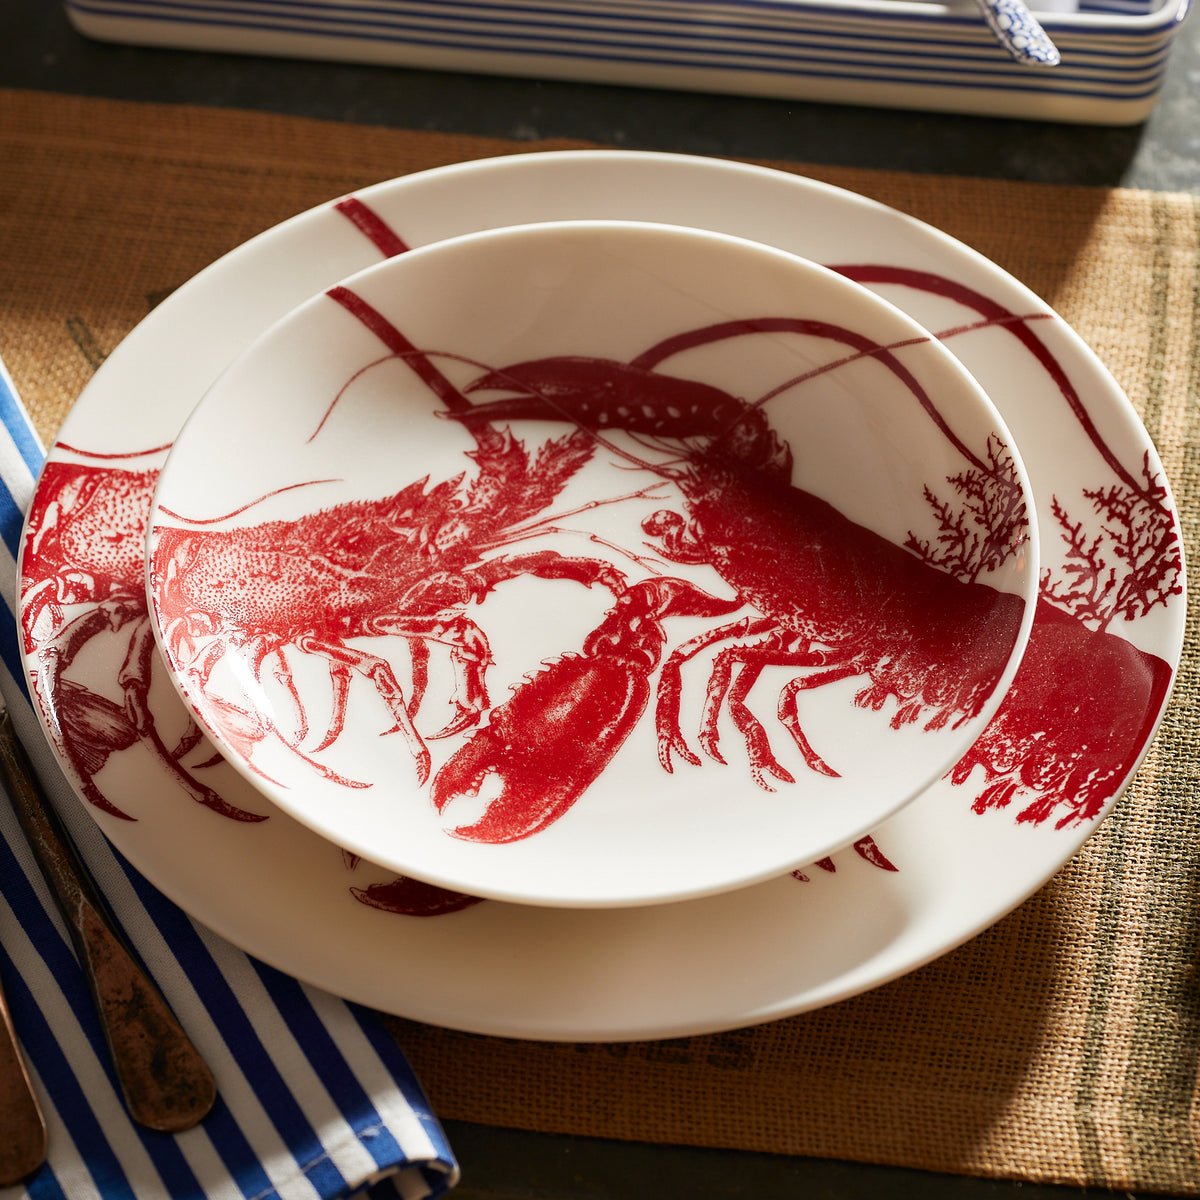 A stacked white bowl and plate set, crafted from premium porcelain with a red lobster illustration, placed on a brown woven mat next to a blue and white striped cloth. This seaside style Caskata Lobster Coupe Dinner Plate is dishwasher and microwave safe.